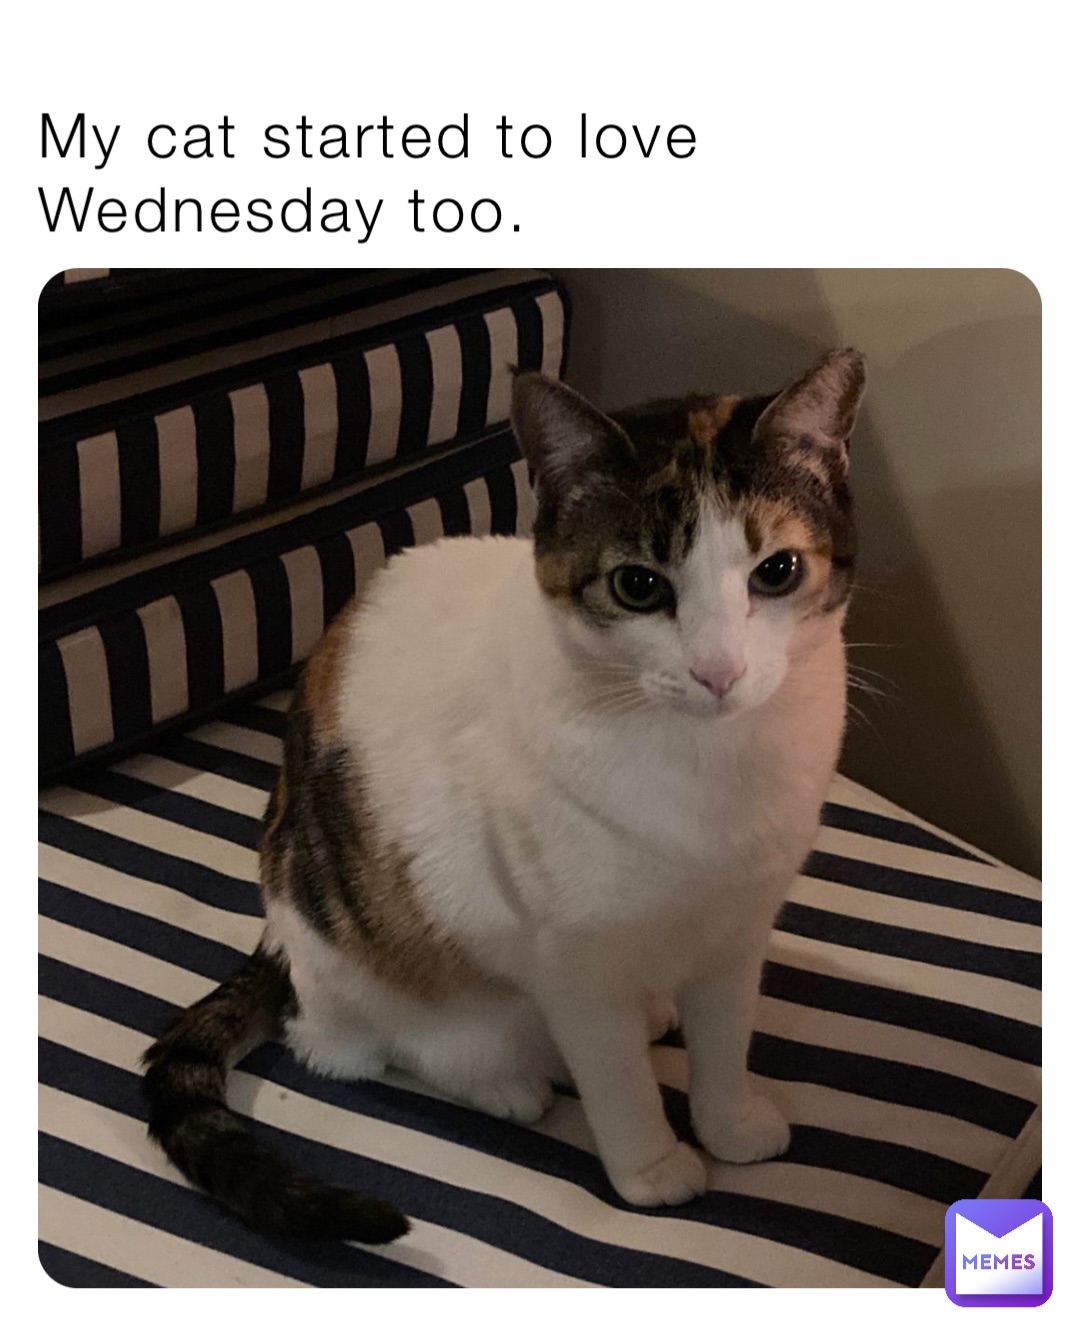 My cat started to love Wednesday too.